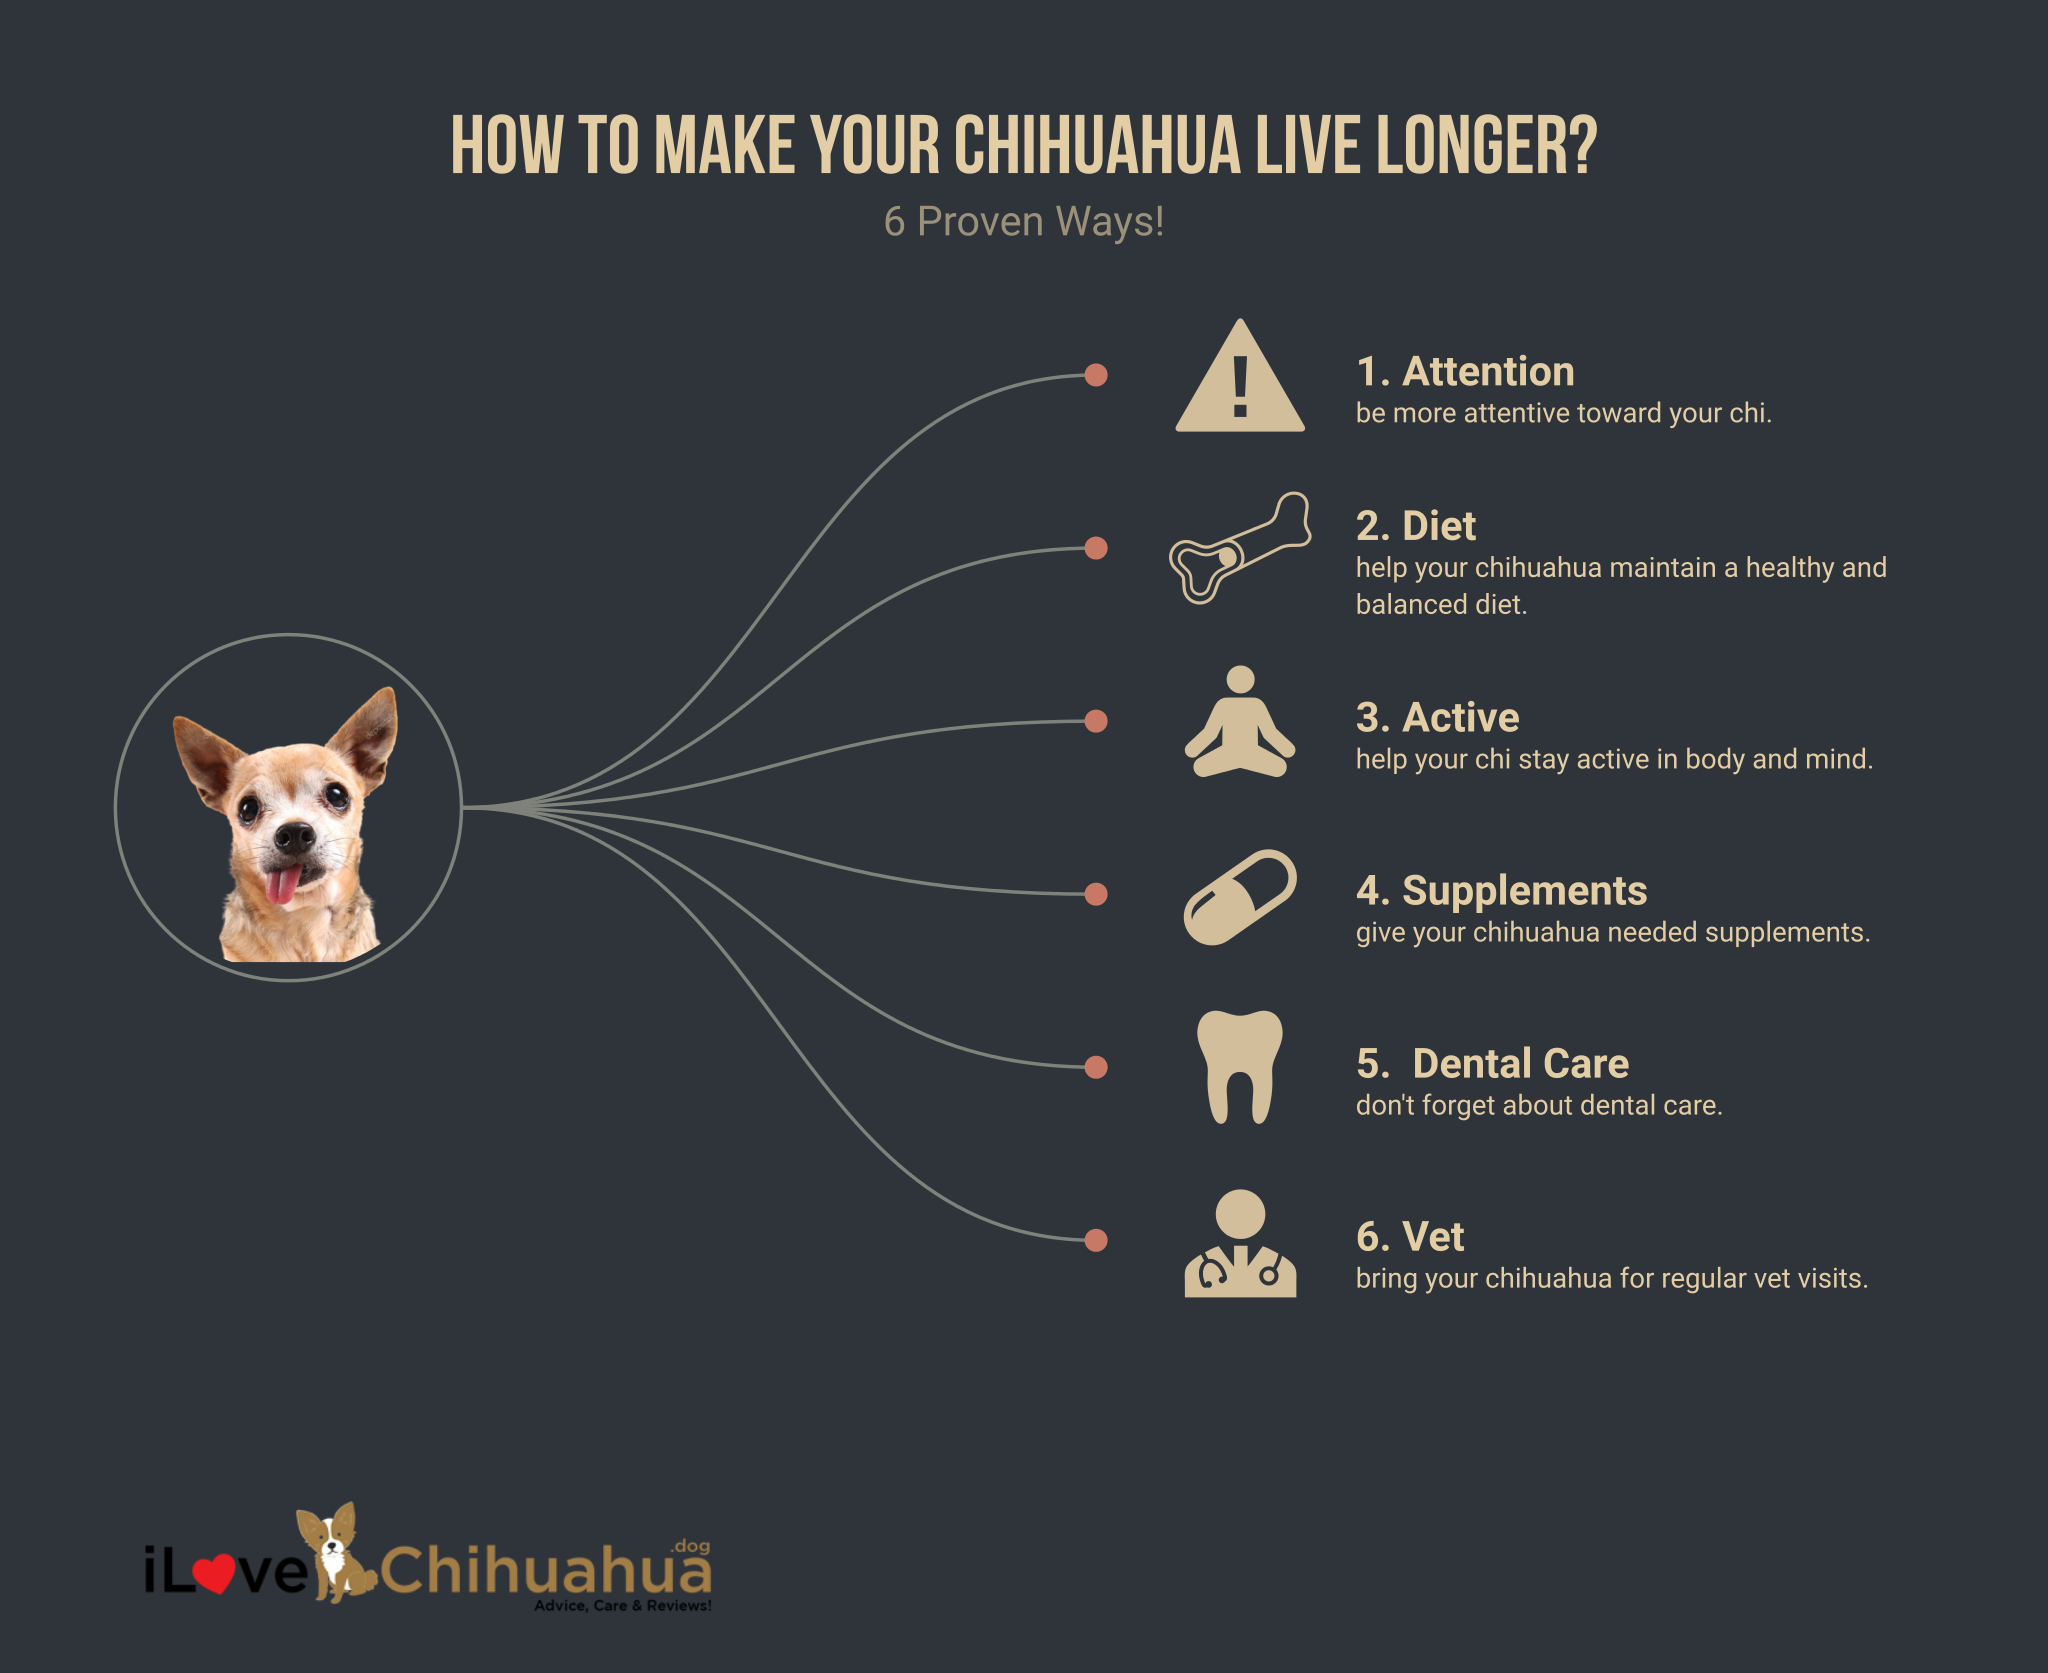 How to Make Your Chihuahua Live Longer (infographic)